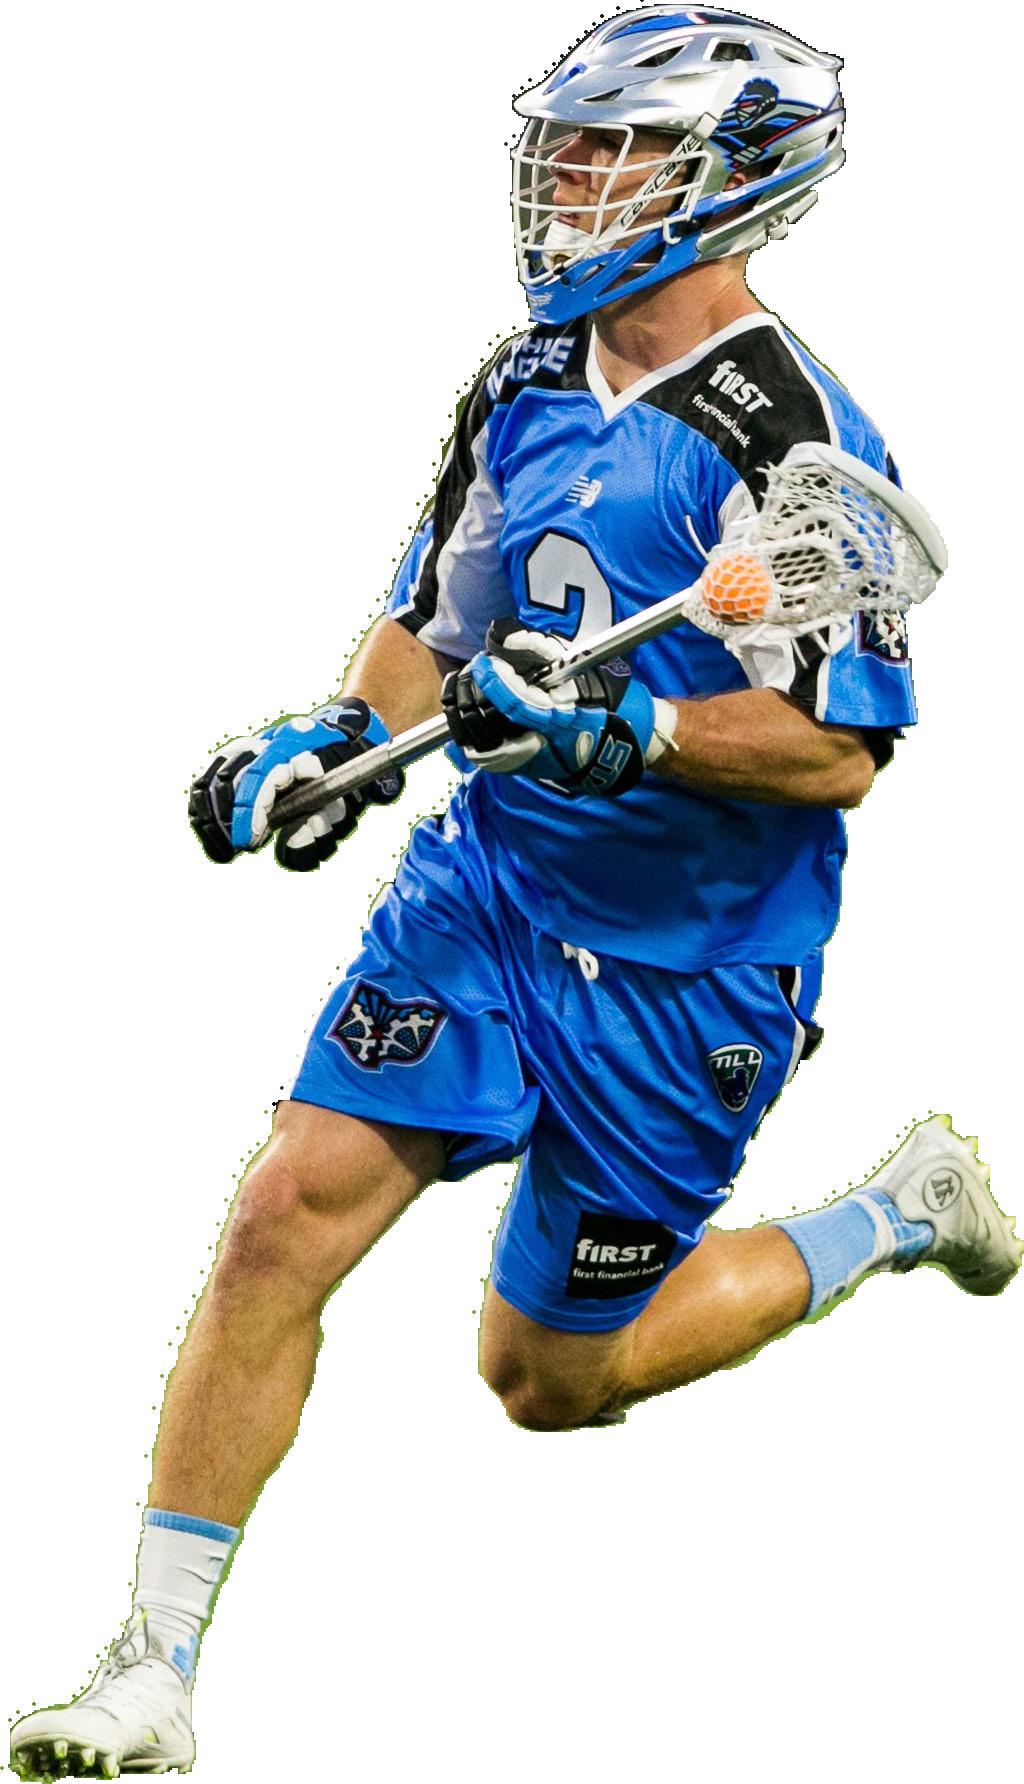 JAKE BERNHARDT MIDFIELD #3 6 1 190 LBS BORN 9/17/89 HOW ACQUIRED: TRADE WITH HAMILTON, MAY 2013 JAKE AT A GLANCE Named to 2018 US Men s Lacrosse Roster 2017 MLL SEASON: Finished with 18 goals and 16